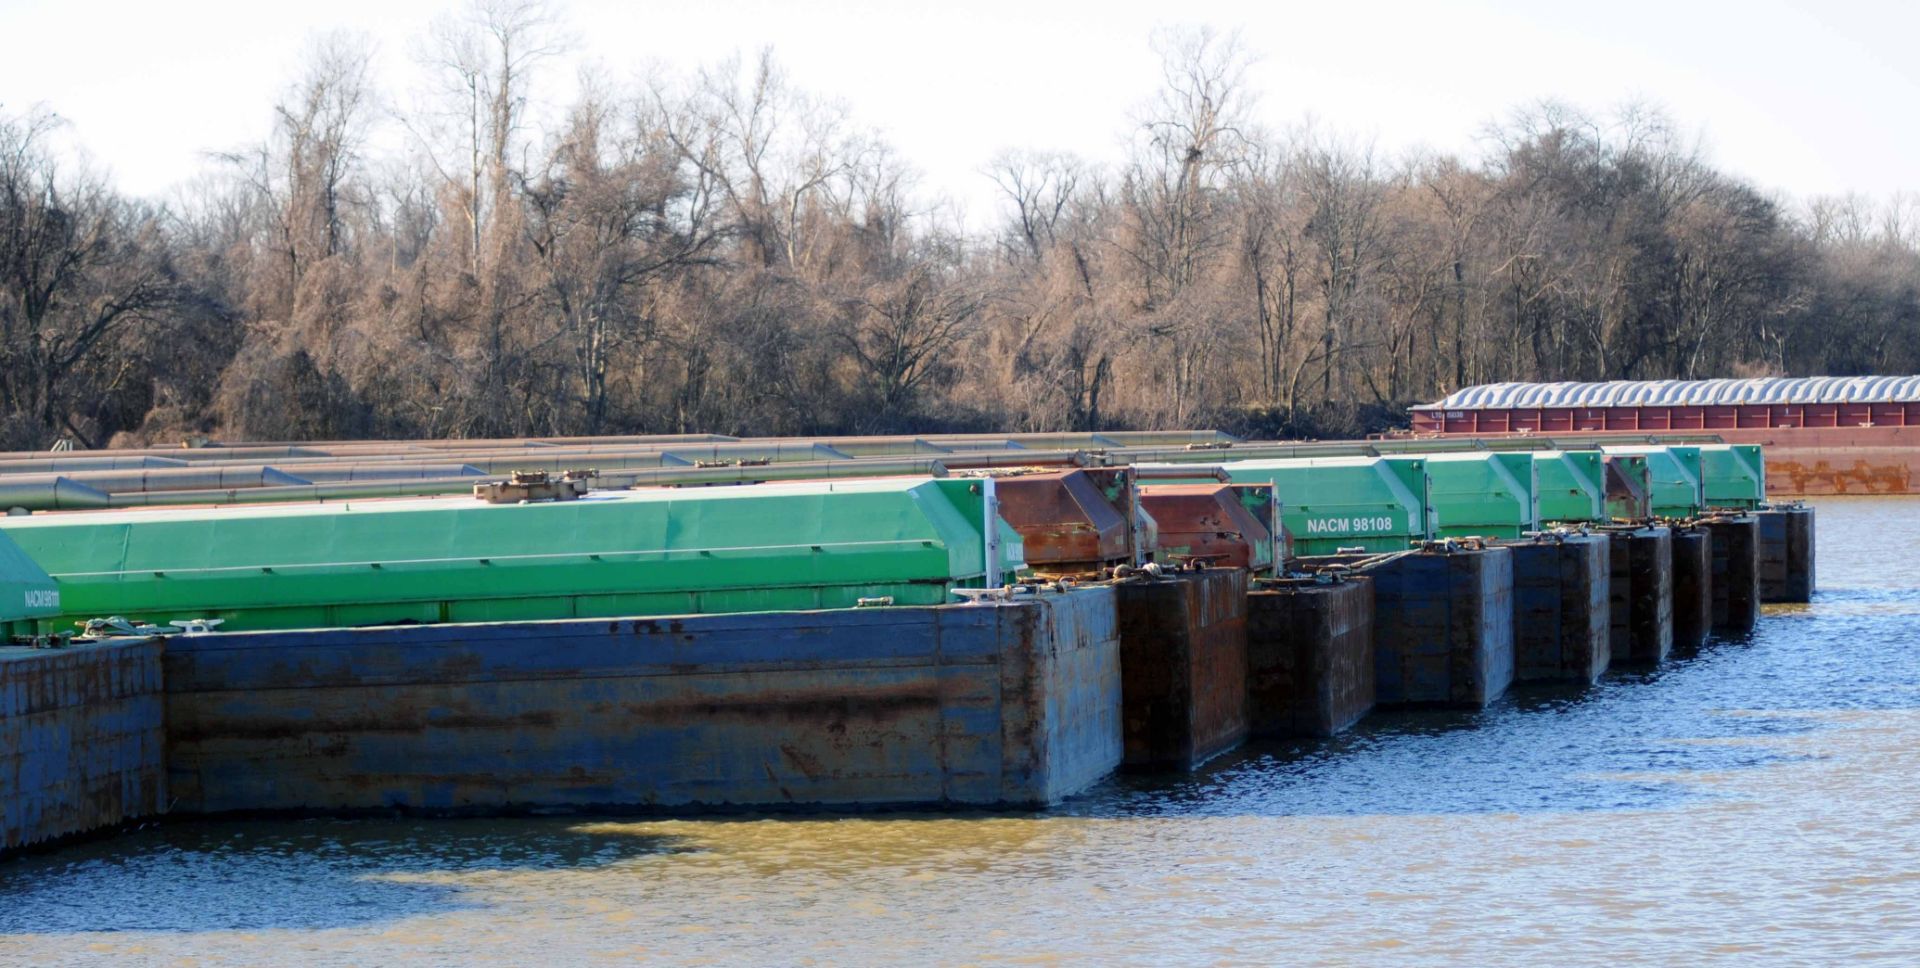 BARGE #NACM98101, (1) USED INDEPENDENT RIVER/SEA GOING TANK BARGE: approximate barge dimensions 200' - Image 8 of 10